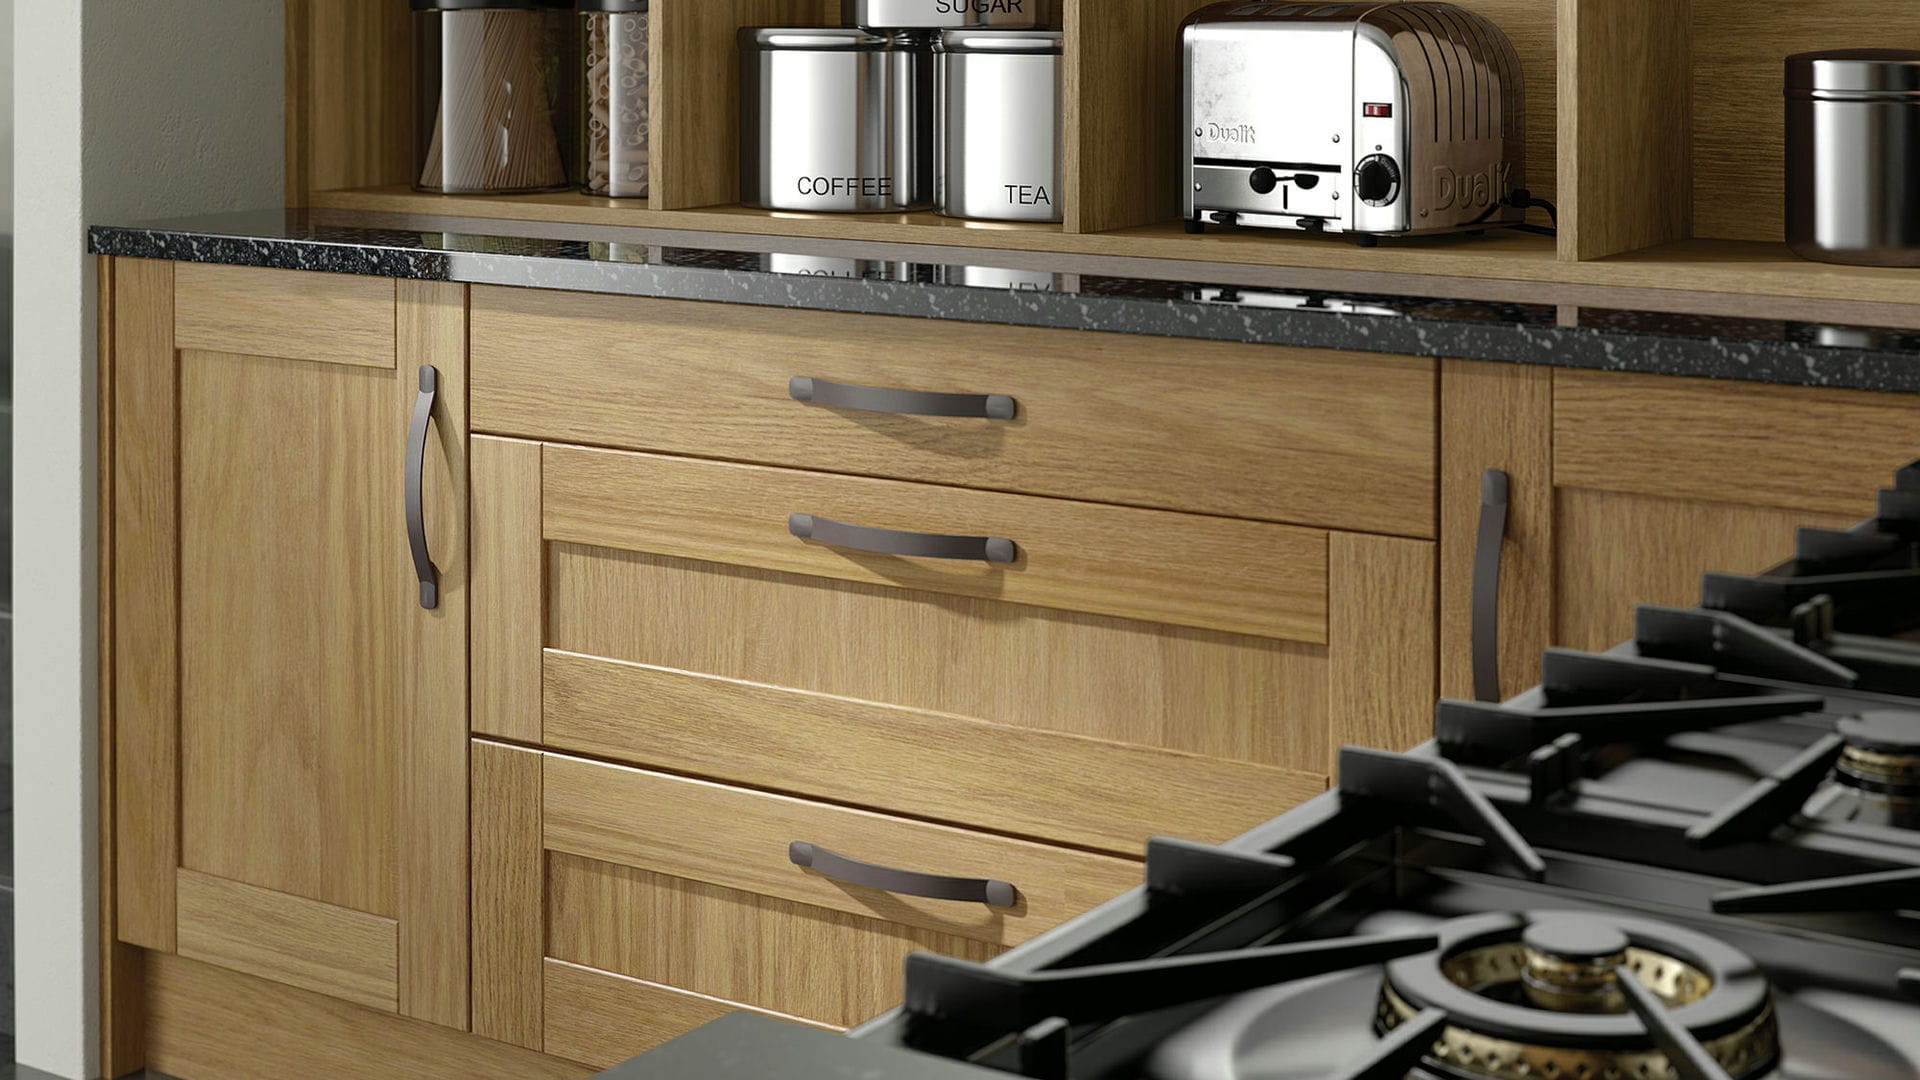 Solid Wood Madison oak kitchens featuring elegant oak craftsmanship perfect for a luxurious kitchen setting